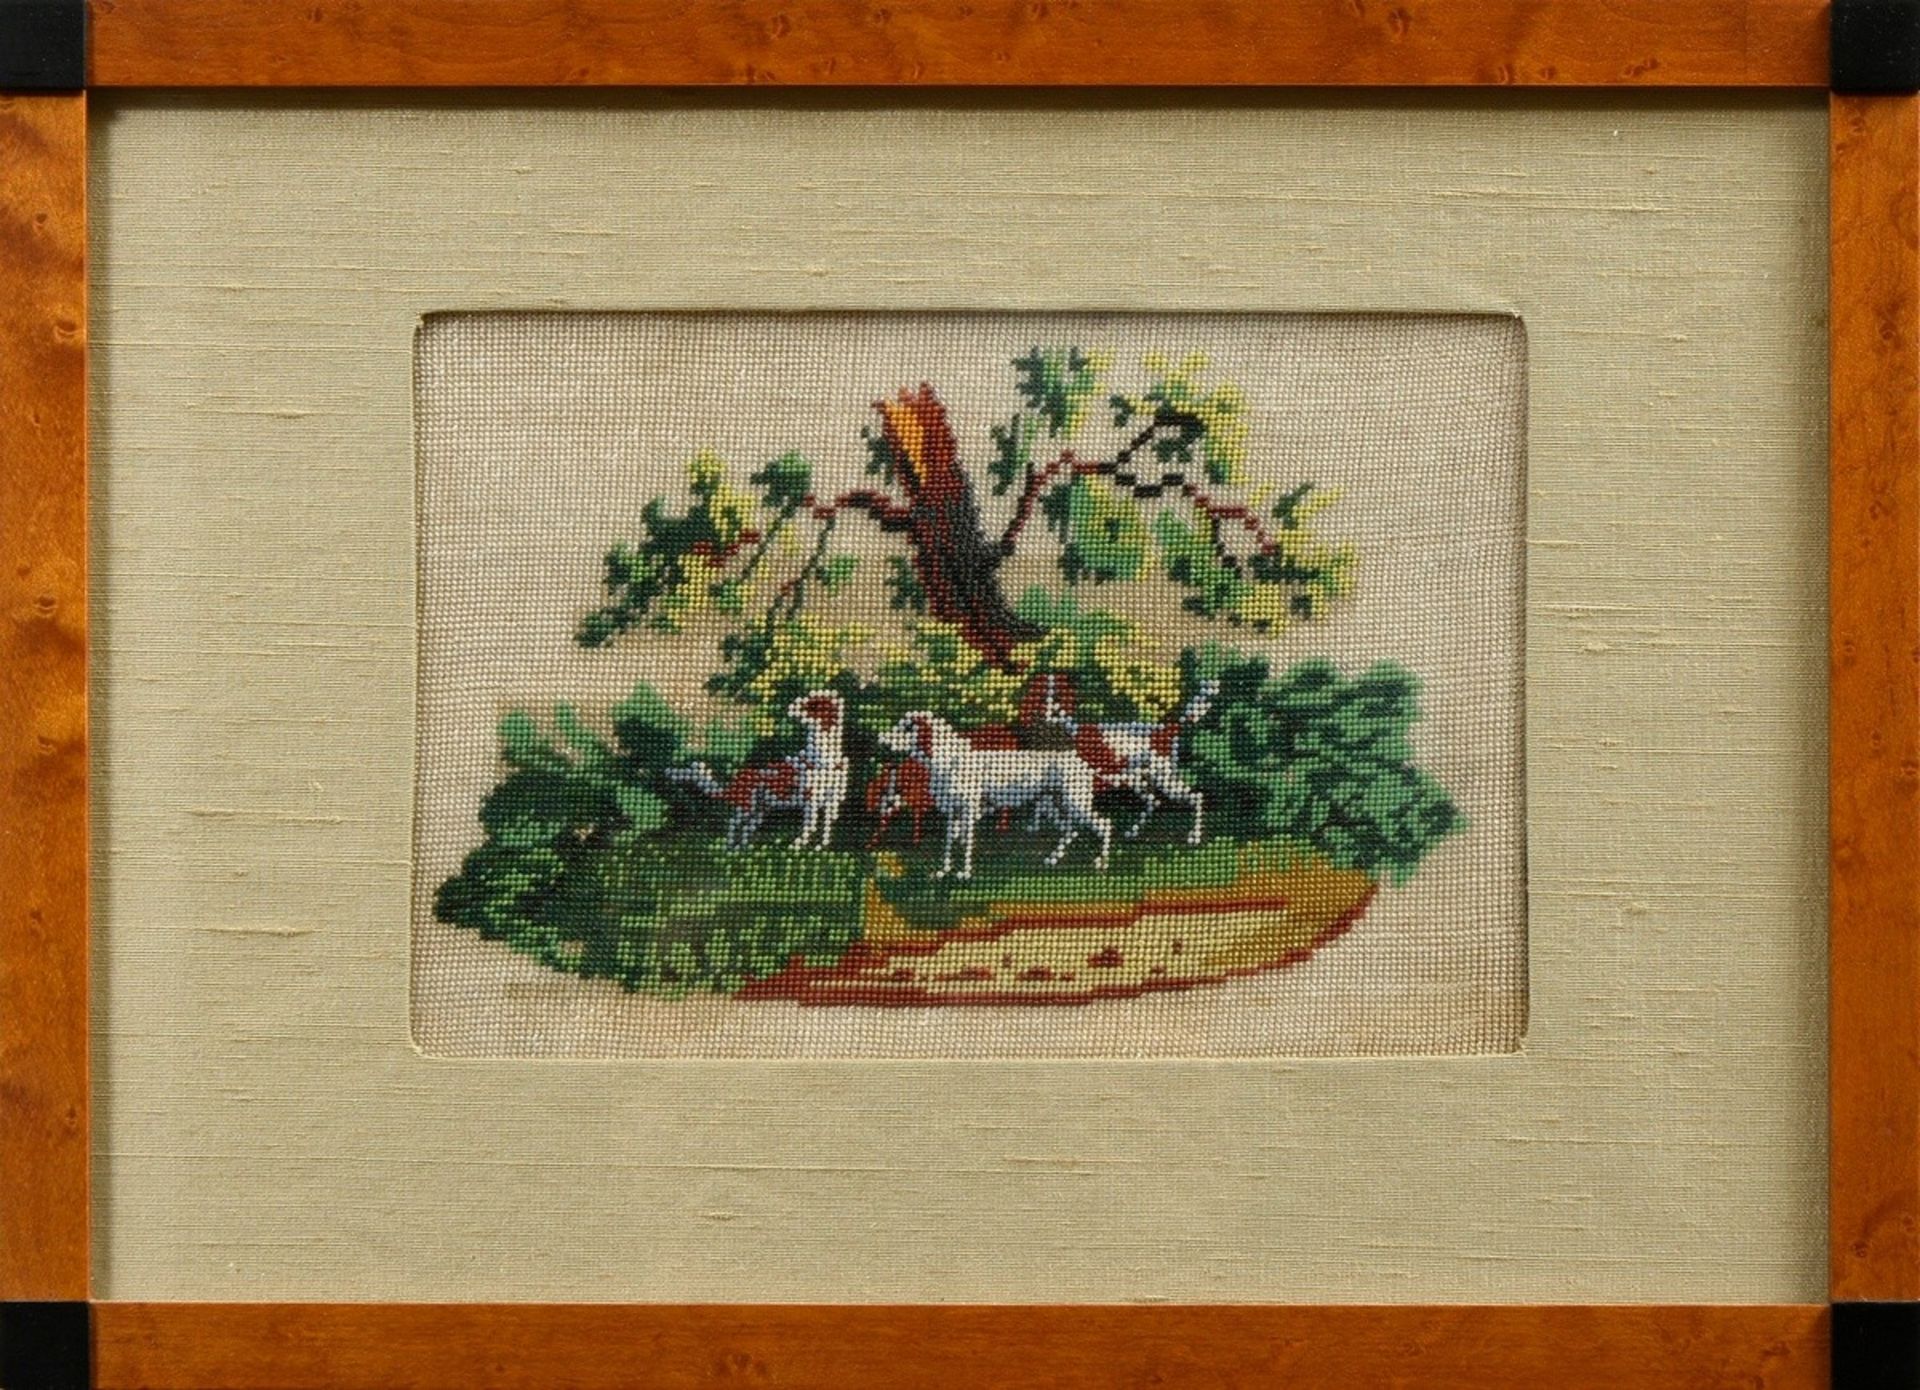 2 Fine pearl embroidery pictures "Hunting dog pack under tree" and "Seascape with buildings", proba - Image 4 of 5